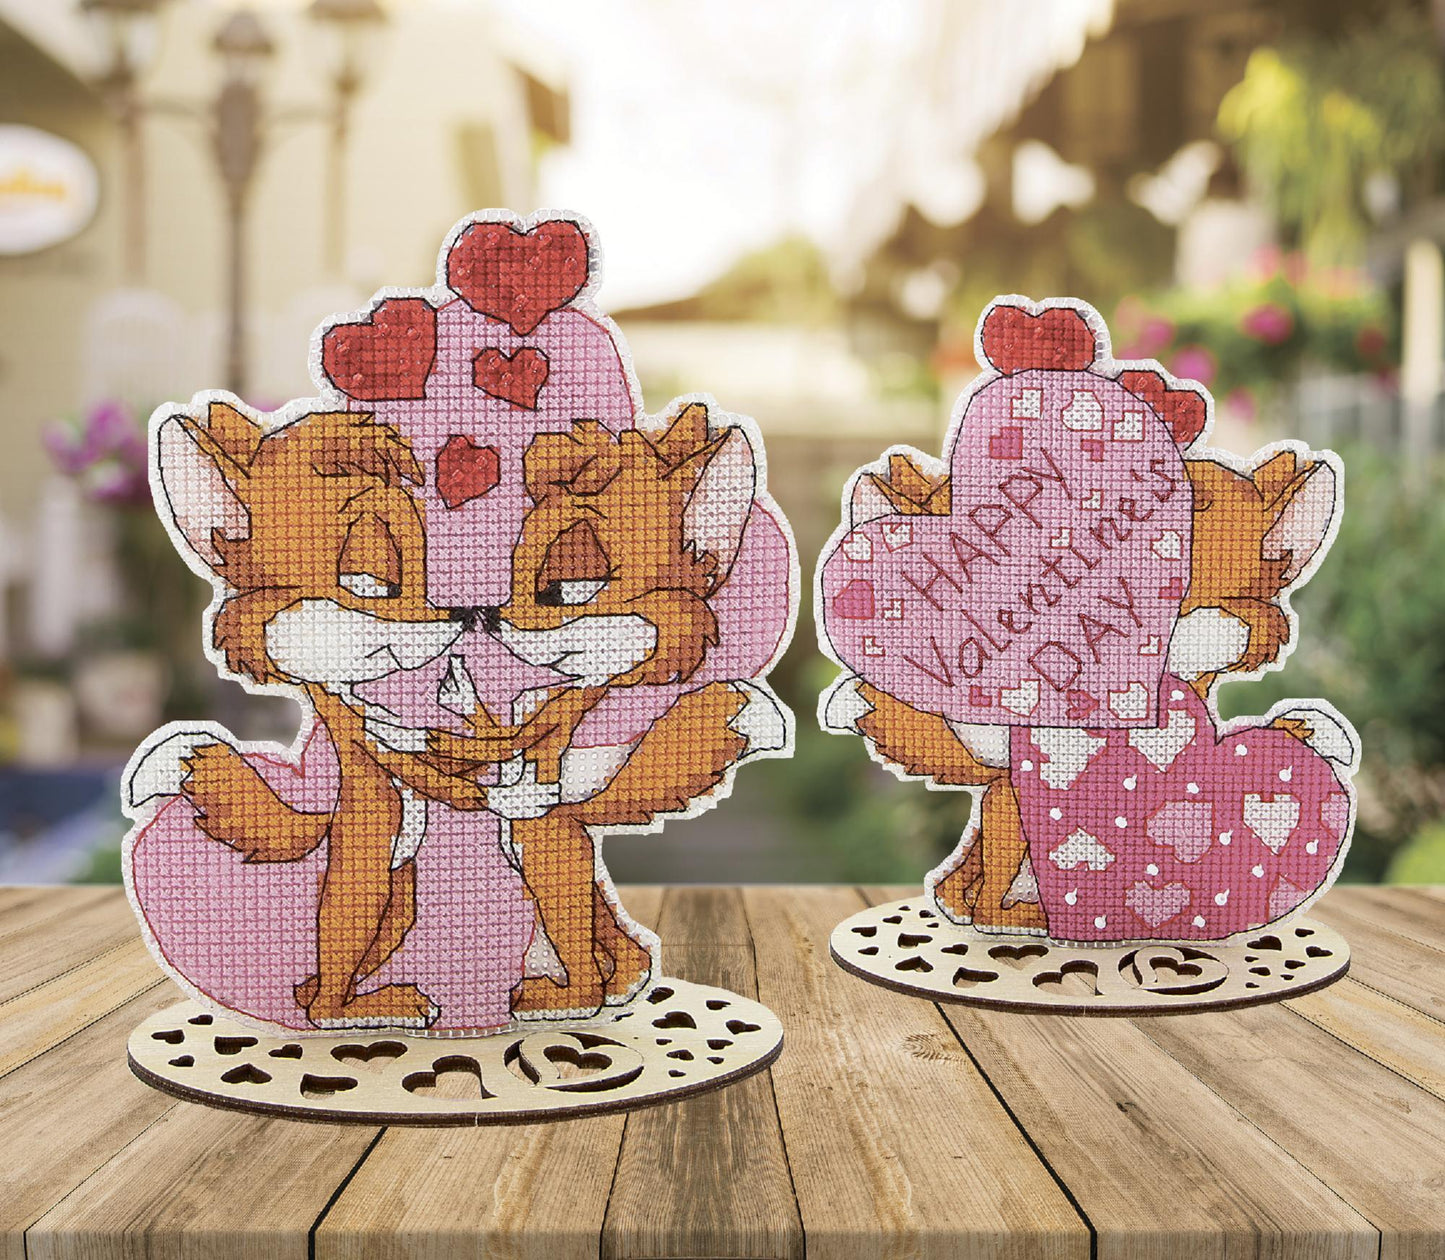 FOXES "Valentine's Day gift", Counted Cross Stitch Kit, 14 count plastic canvas, size 10,5 x 13 cm, CRYSTAL ART (T-60)